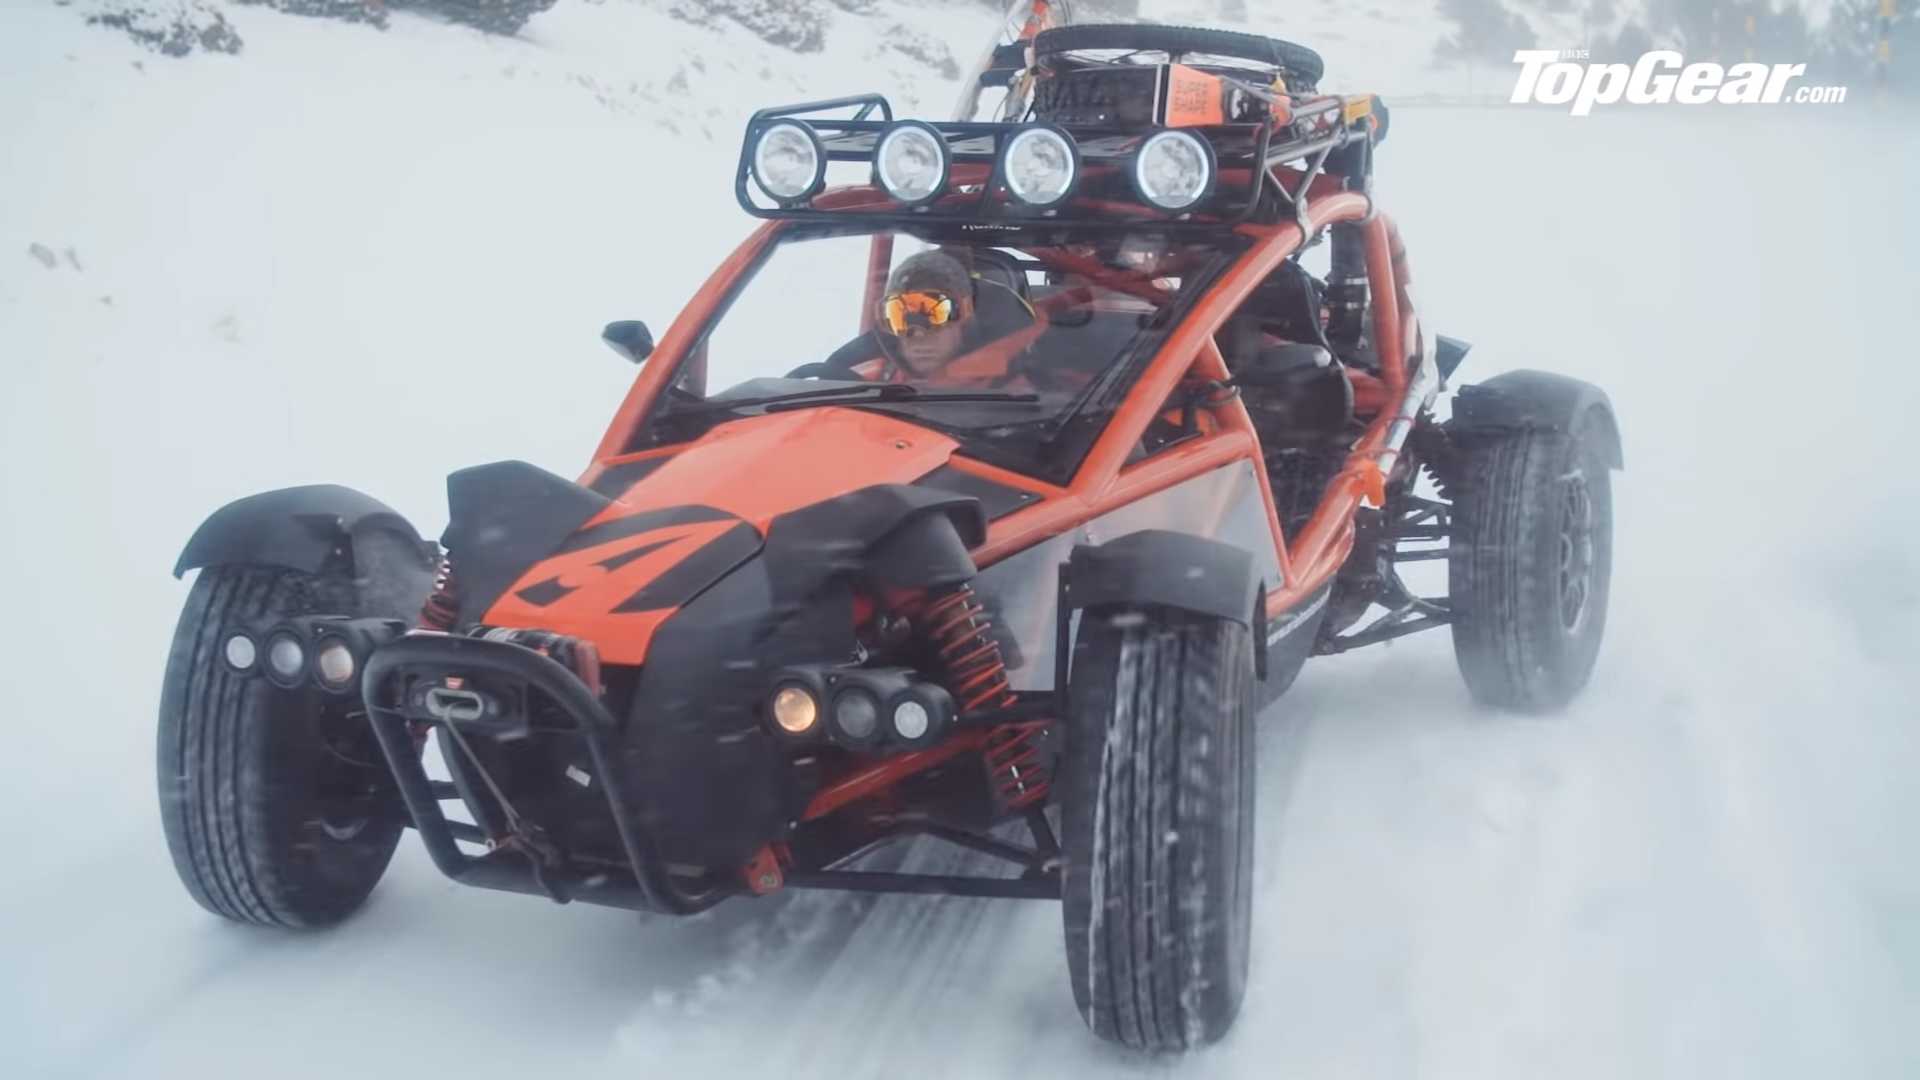 Driving Ariel Nomad Up Snowy Mountain Looks Like Tons Of Fun